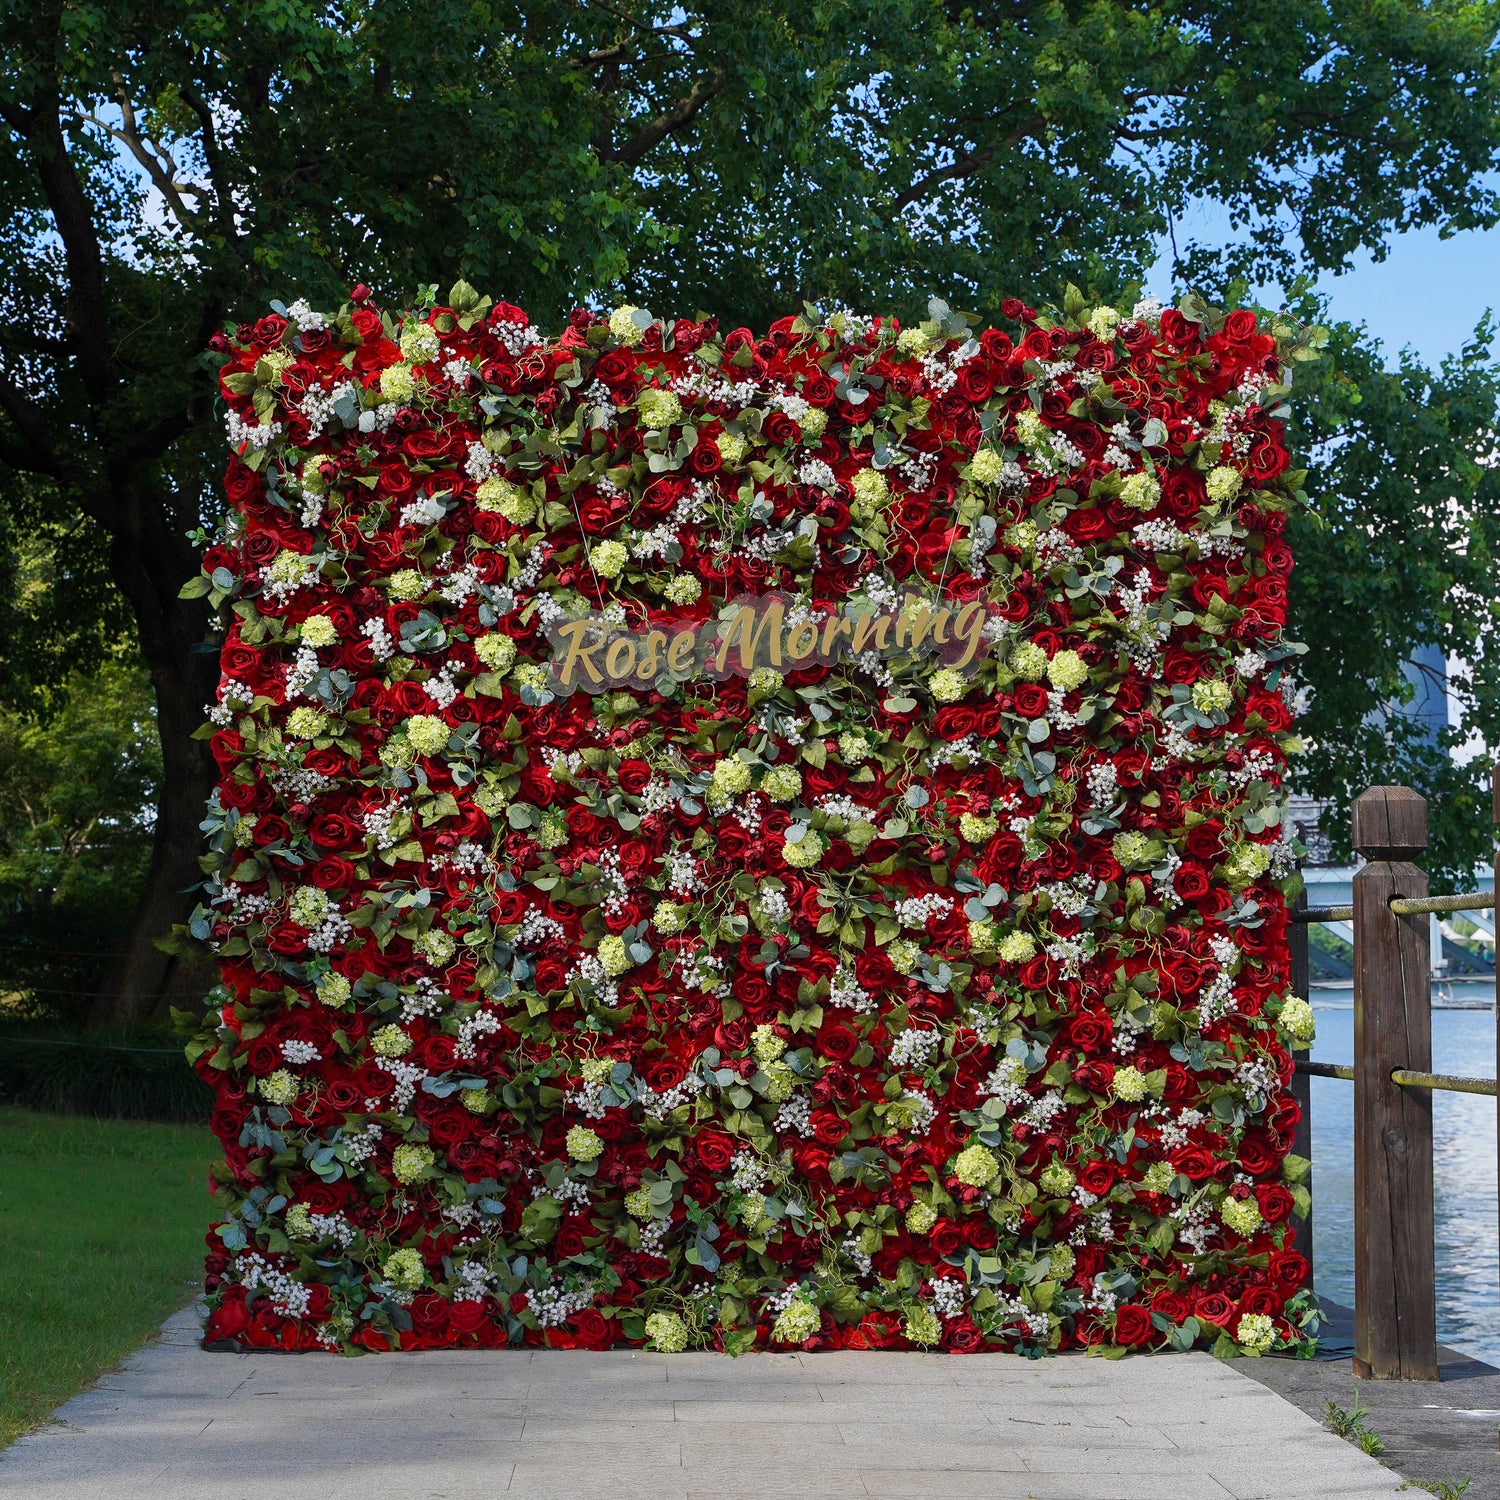 Lora: 3D Fabric Artificial Flower Wall Rolling Up Curtain Flower Wall R785 - 8ft*8ft Rose Morning